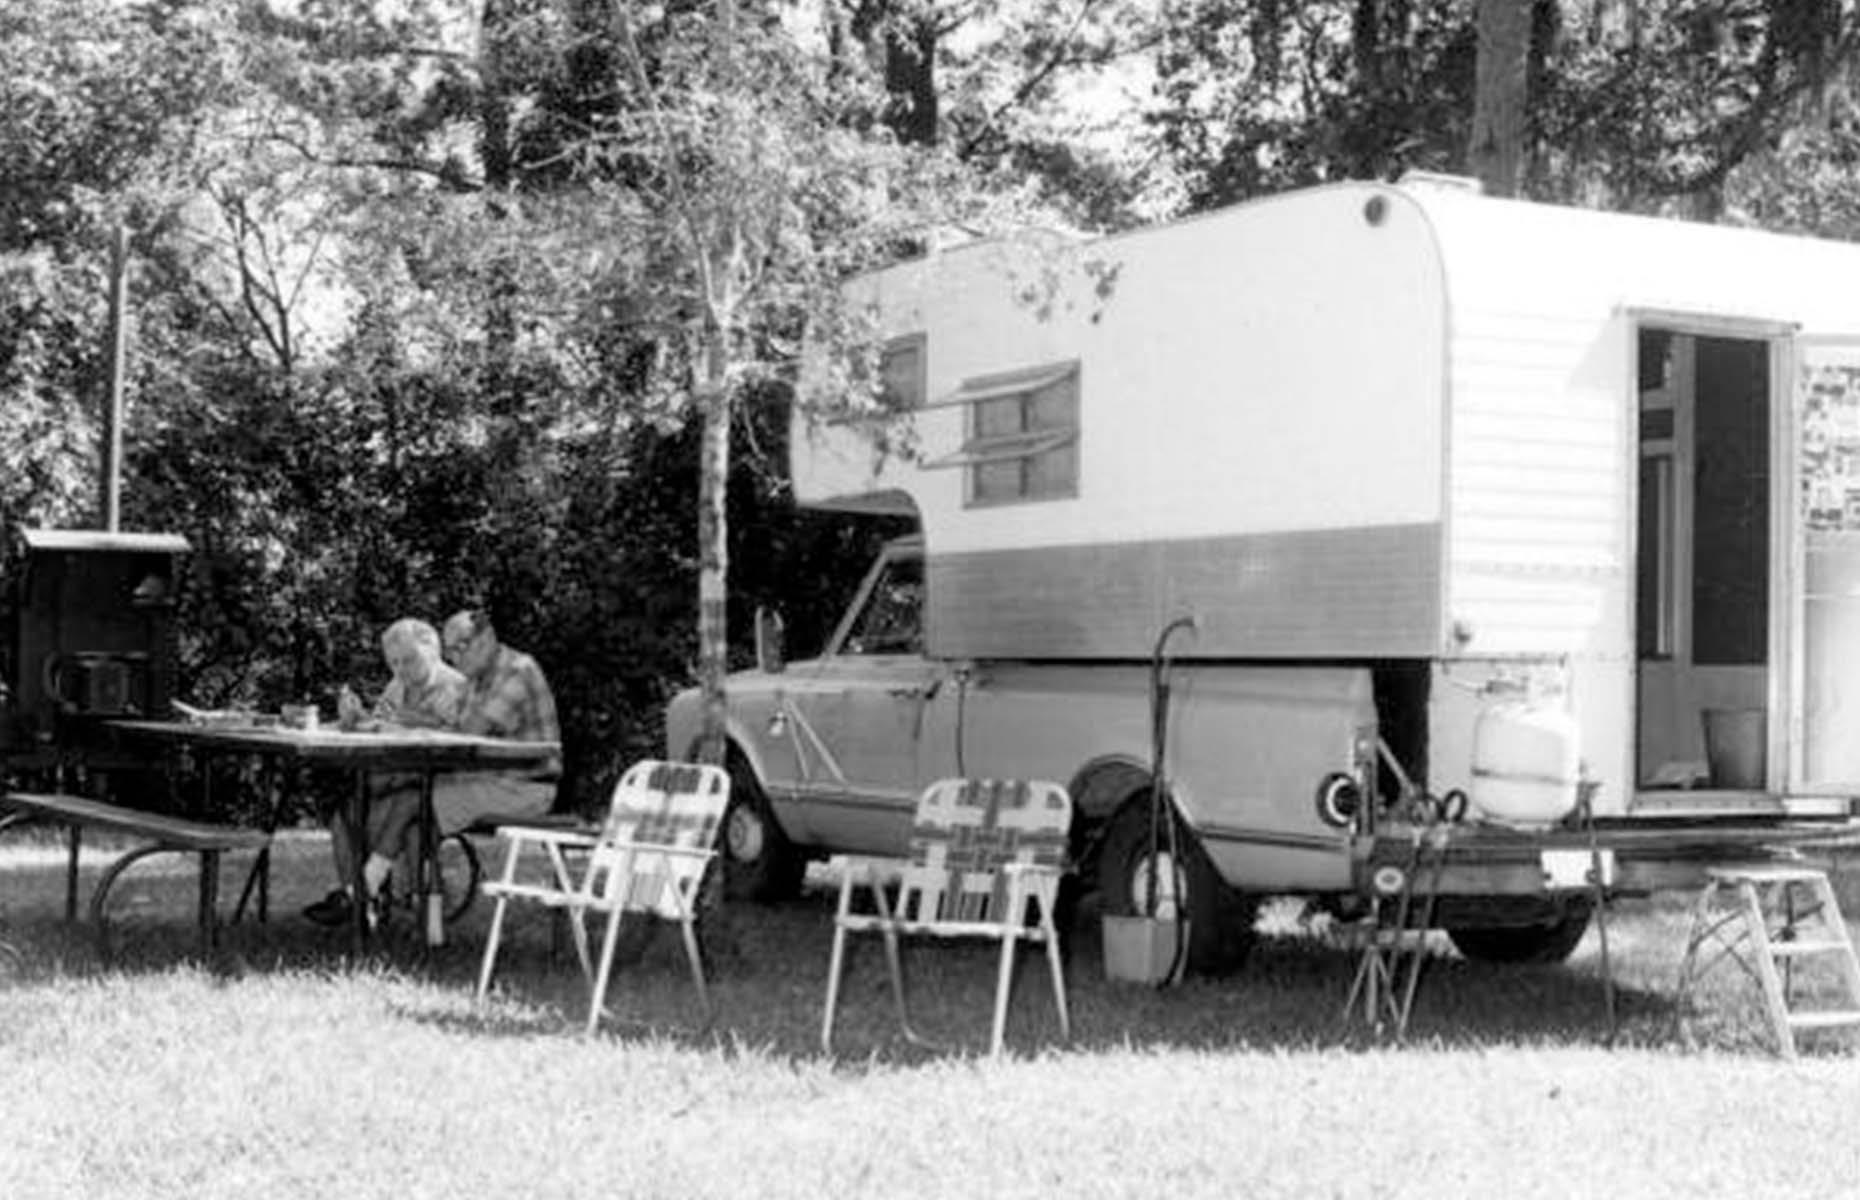 <p>Some vacationers used their RV as a base for activities like fishing, water sports or hiking, while others were content to simply be. This photo from the mid-Seventies shows an elderly couple at a picnic bench in a peaceful RV site in Torreya State Park, an underrated state park in Florida. Their lawn chairs are set out ready for a spot of sunbathing...</p>  <p><strong><a href="https://www.loveexploring.com/galleries/86372/the-most-beautiful-state-park-in-every-us-state">This is the most beautiful state park in every US state</a></strong></p>